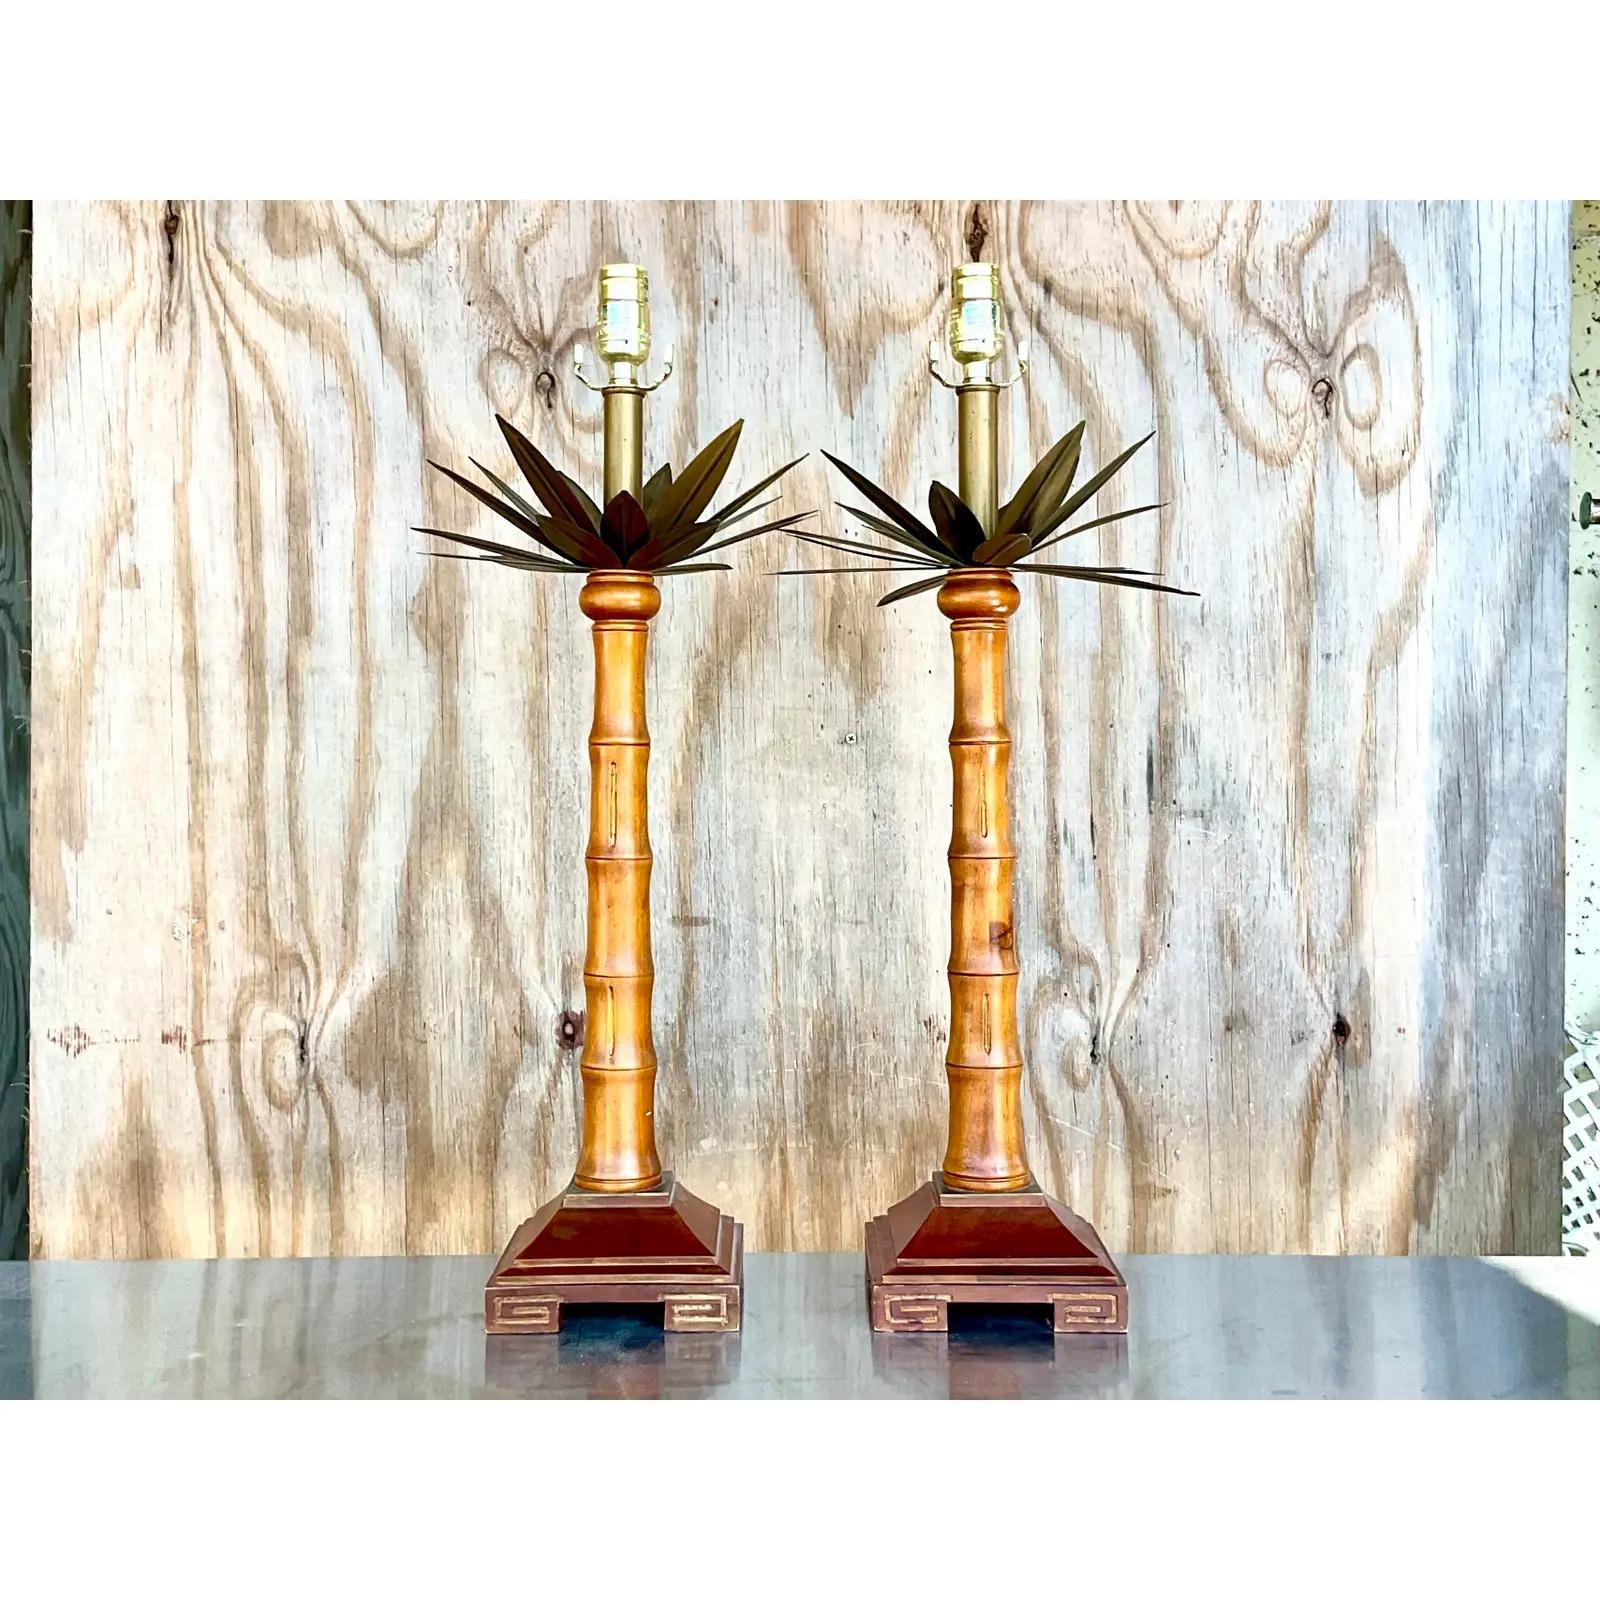 Fantastic pair of vintage candlestick lamps. Beautiful palm tree design with big brass palm fronds. Greek Key carving on the plinth. Acquired from a Palm Beach estate.